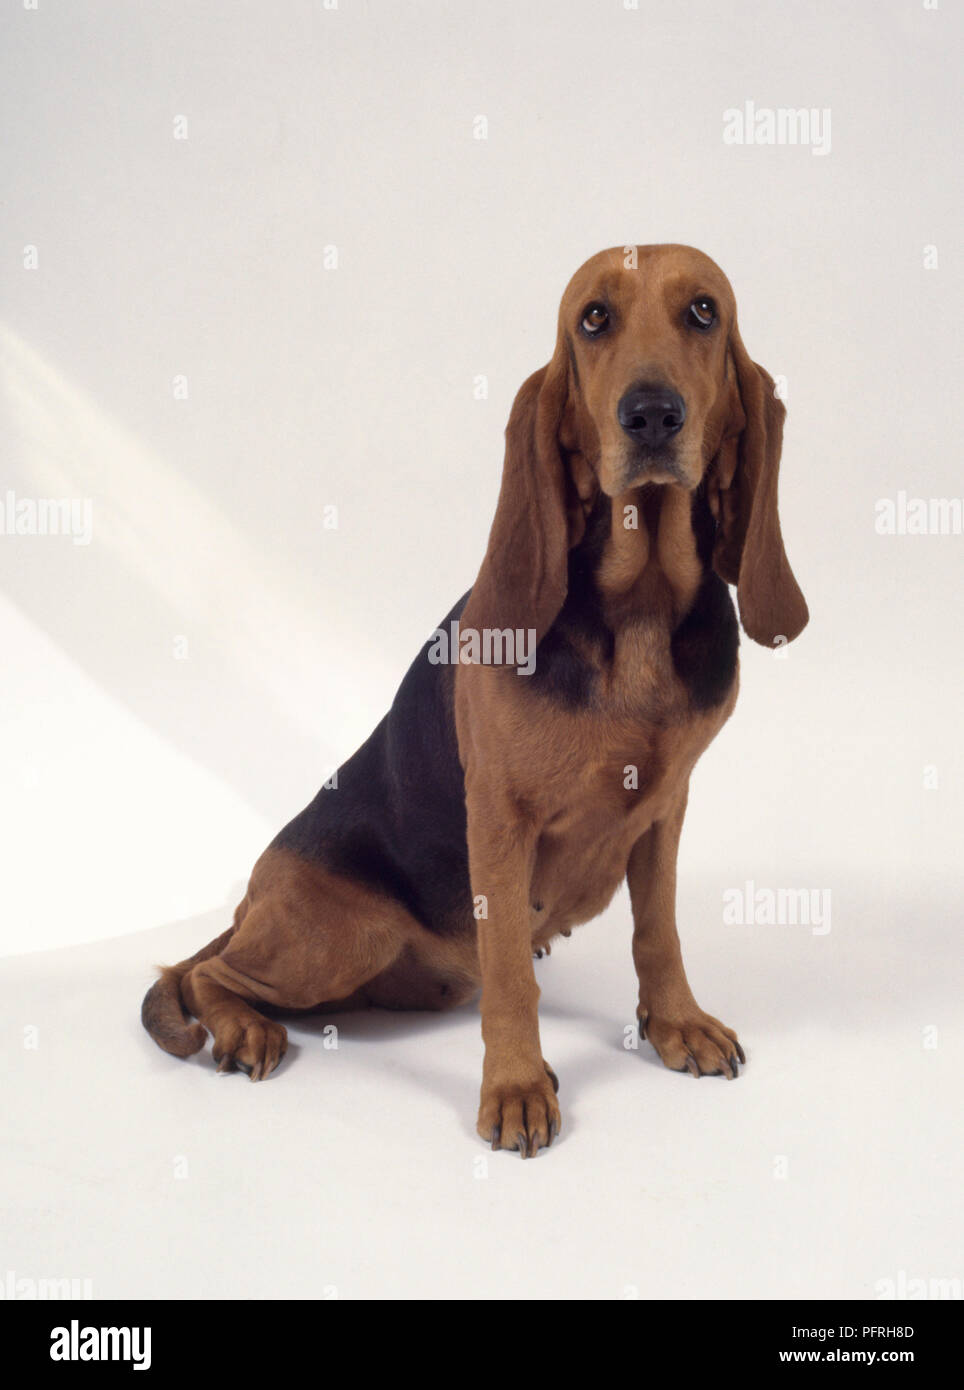 Bruno Jura Hound High Resolution Stock Photography And Images Alamy